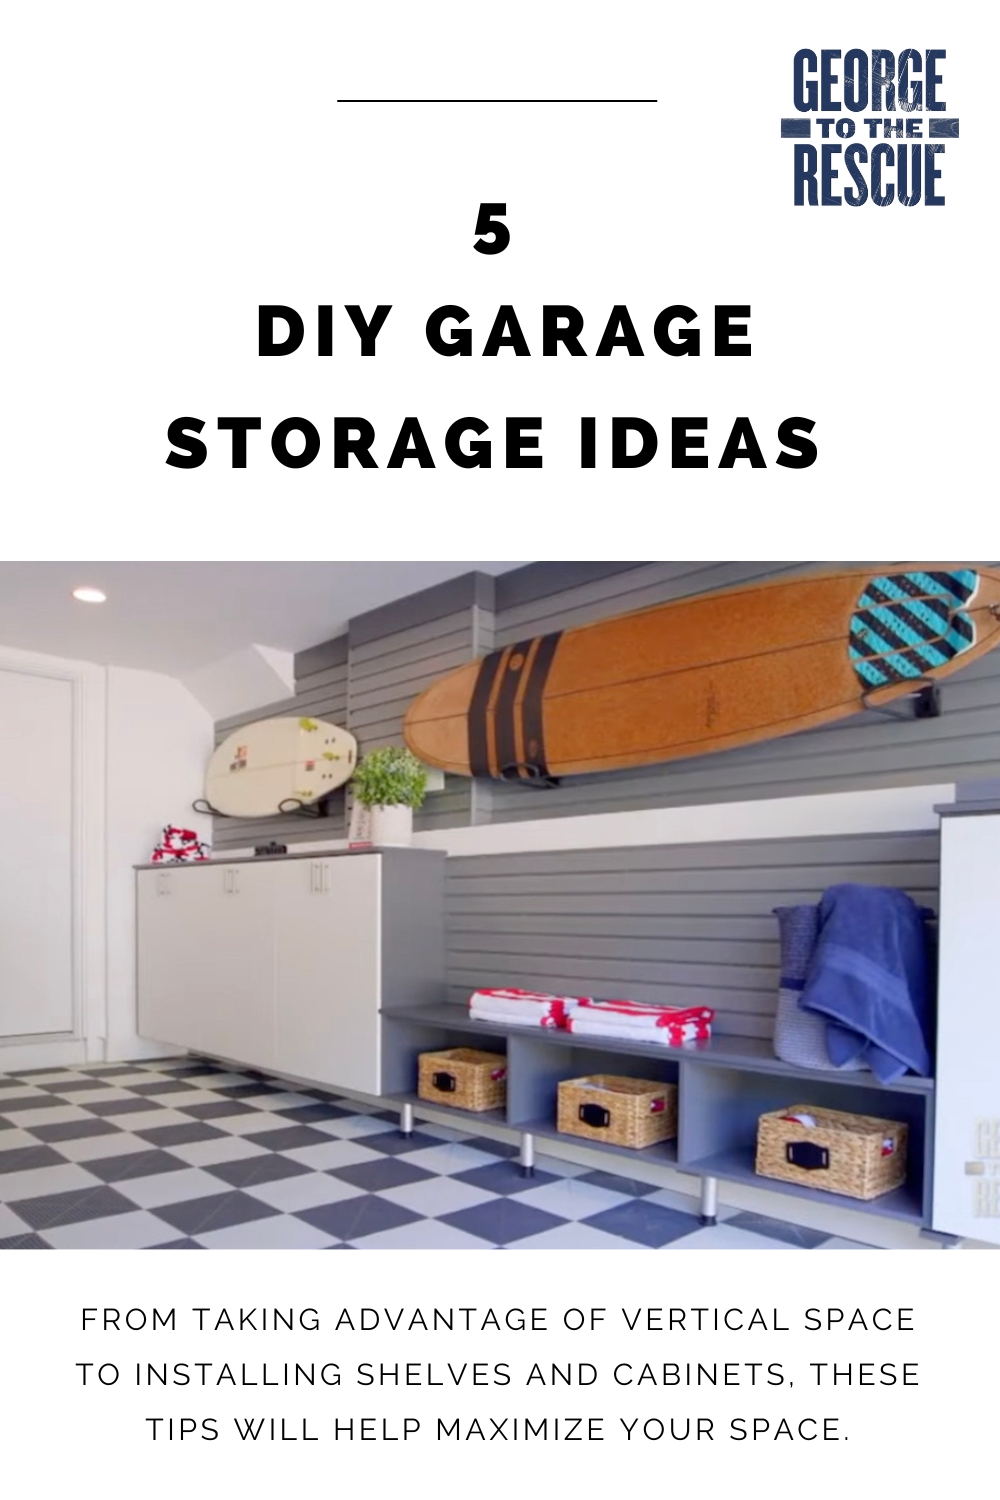 DIY STORAGE~ HOW TO STORE YOUR STUFF  Diy storage shelves, Diy storage, Storage  bin shelves